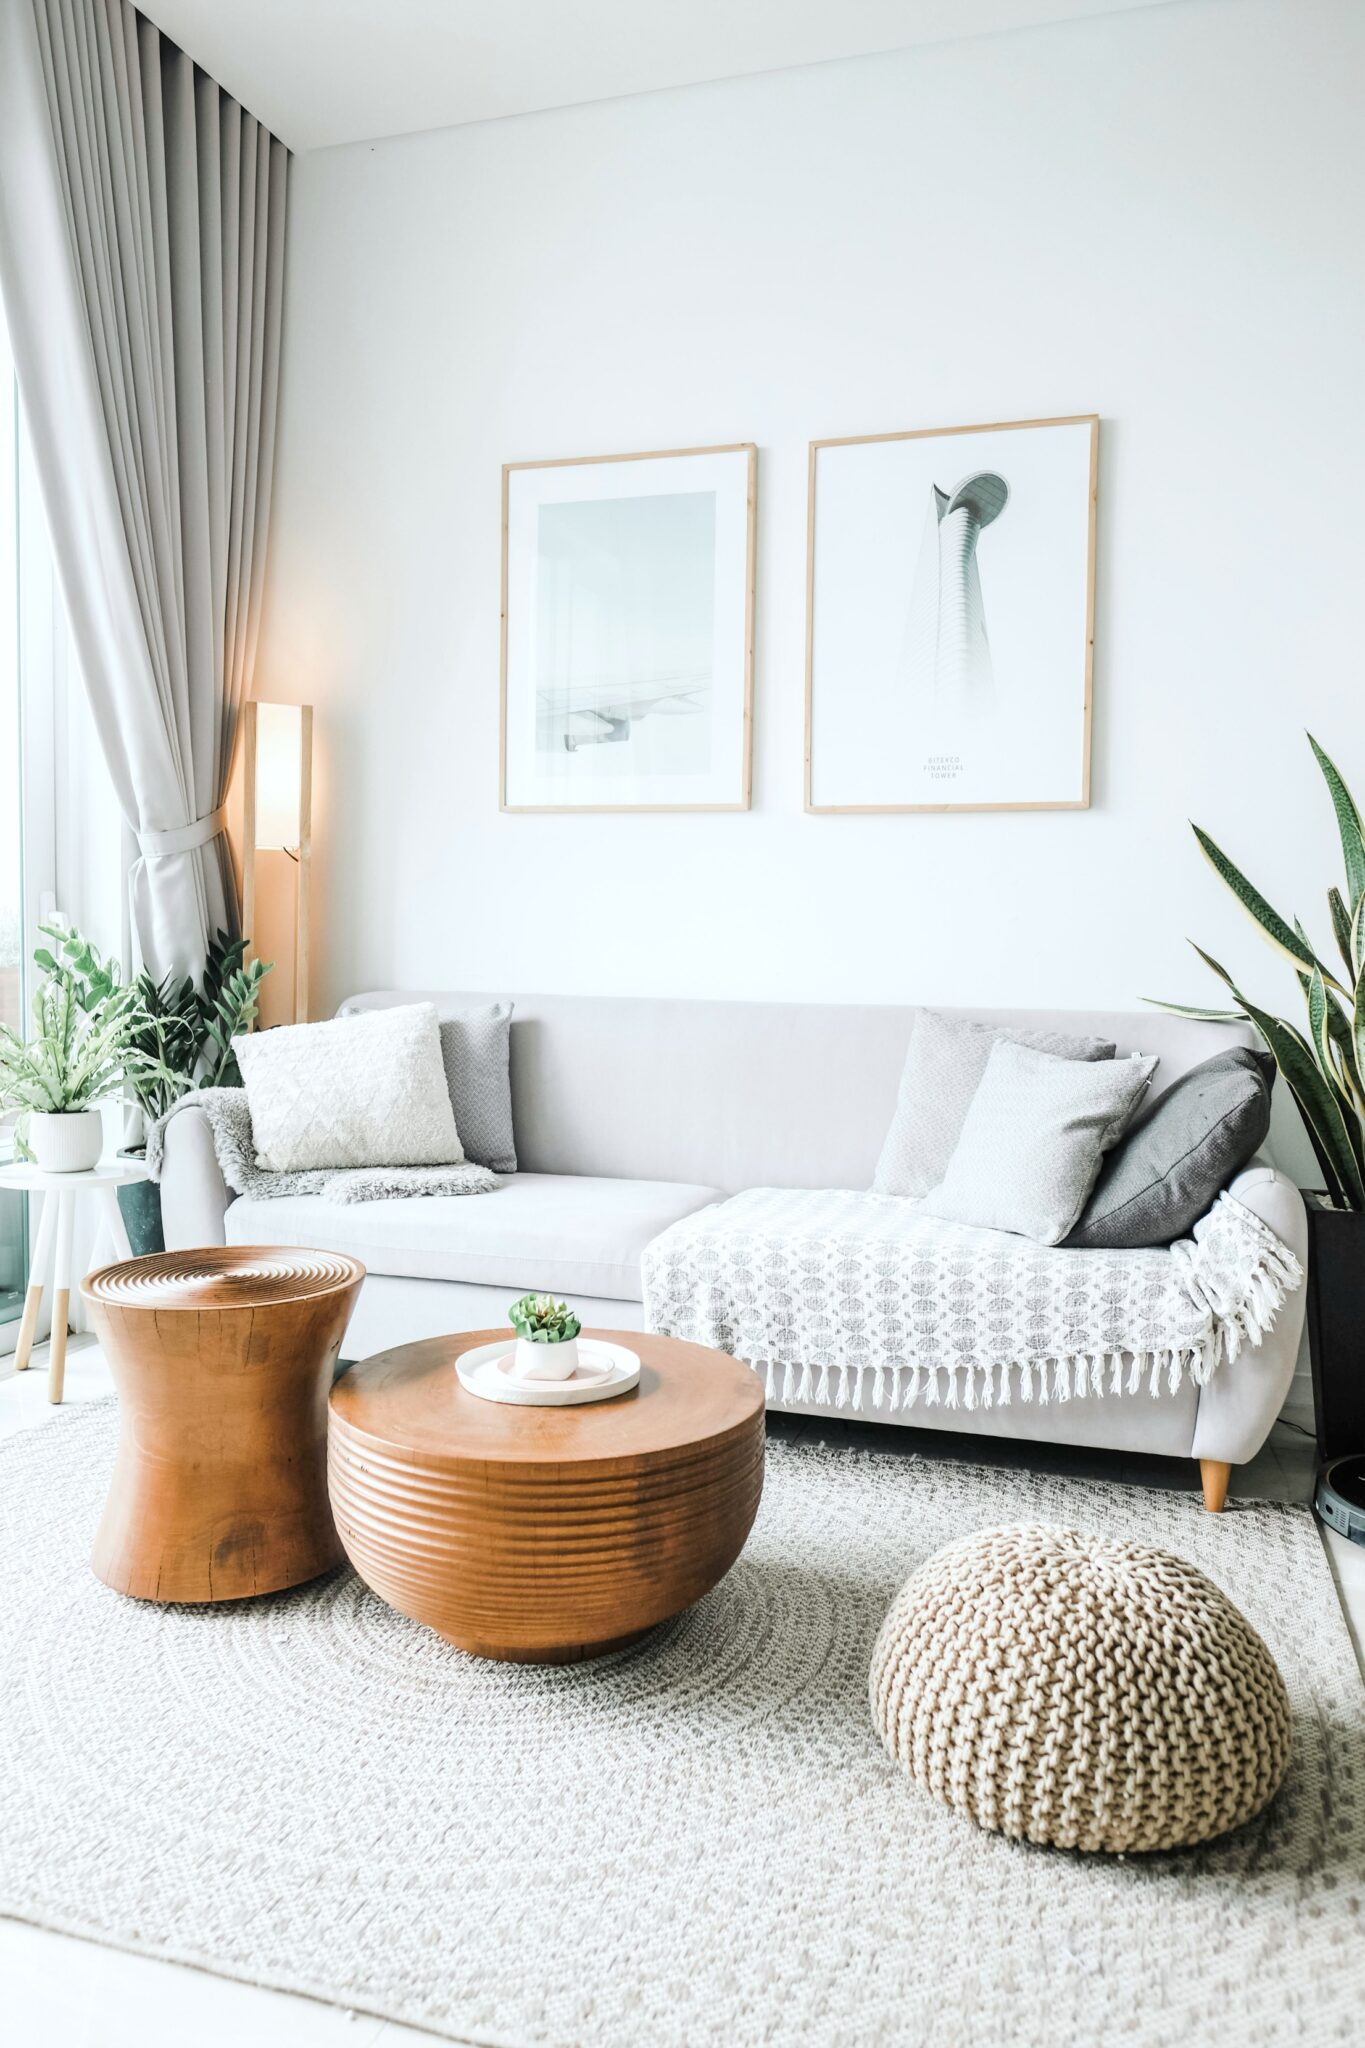 A beautiful boho living room, a reason to consider what the practical benefits of homeowners insurance are.